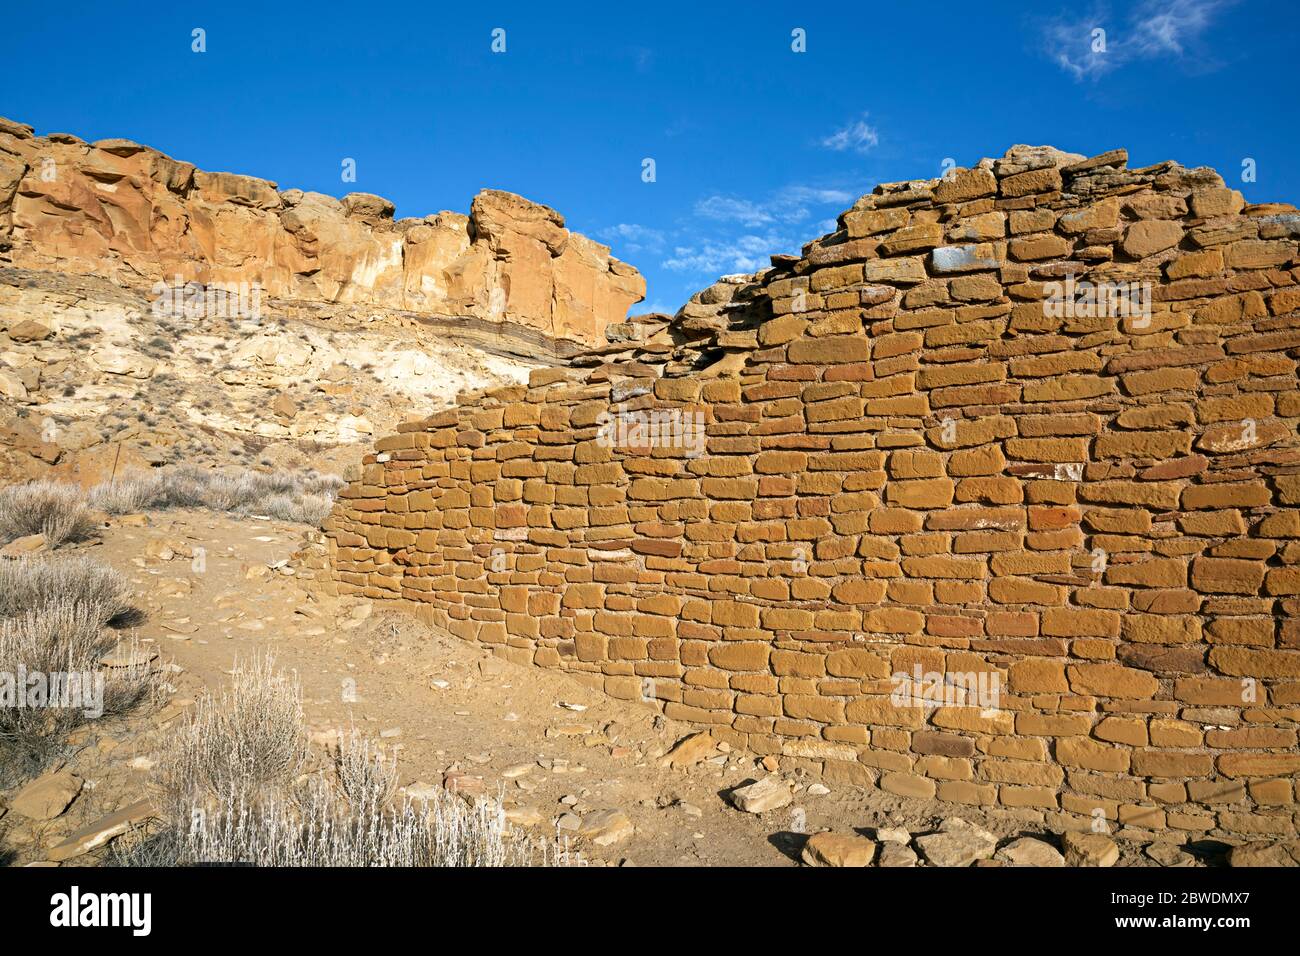 NEW MEXICO - Wall of the Una Vida ruin, built around 900 years ago by the Ancestral Puebloans now part of the Chaco Culture National Historical Park. Stock Photo